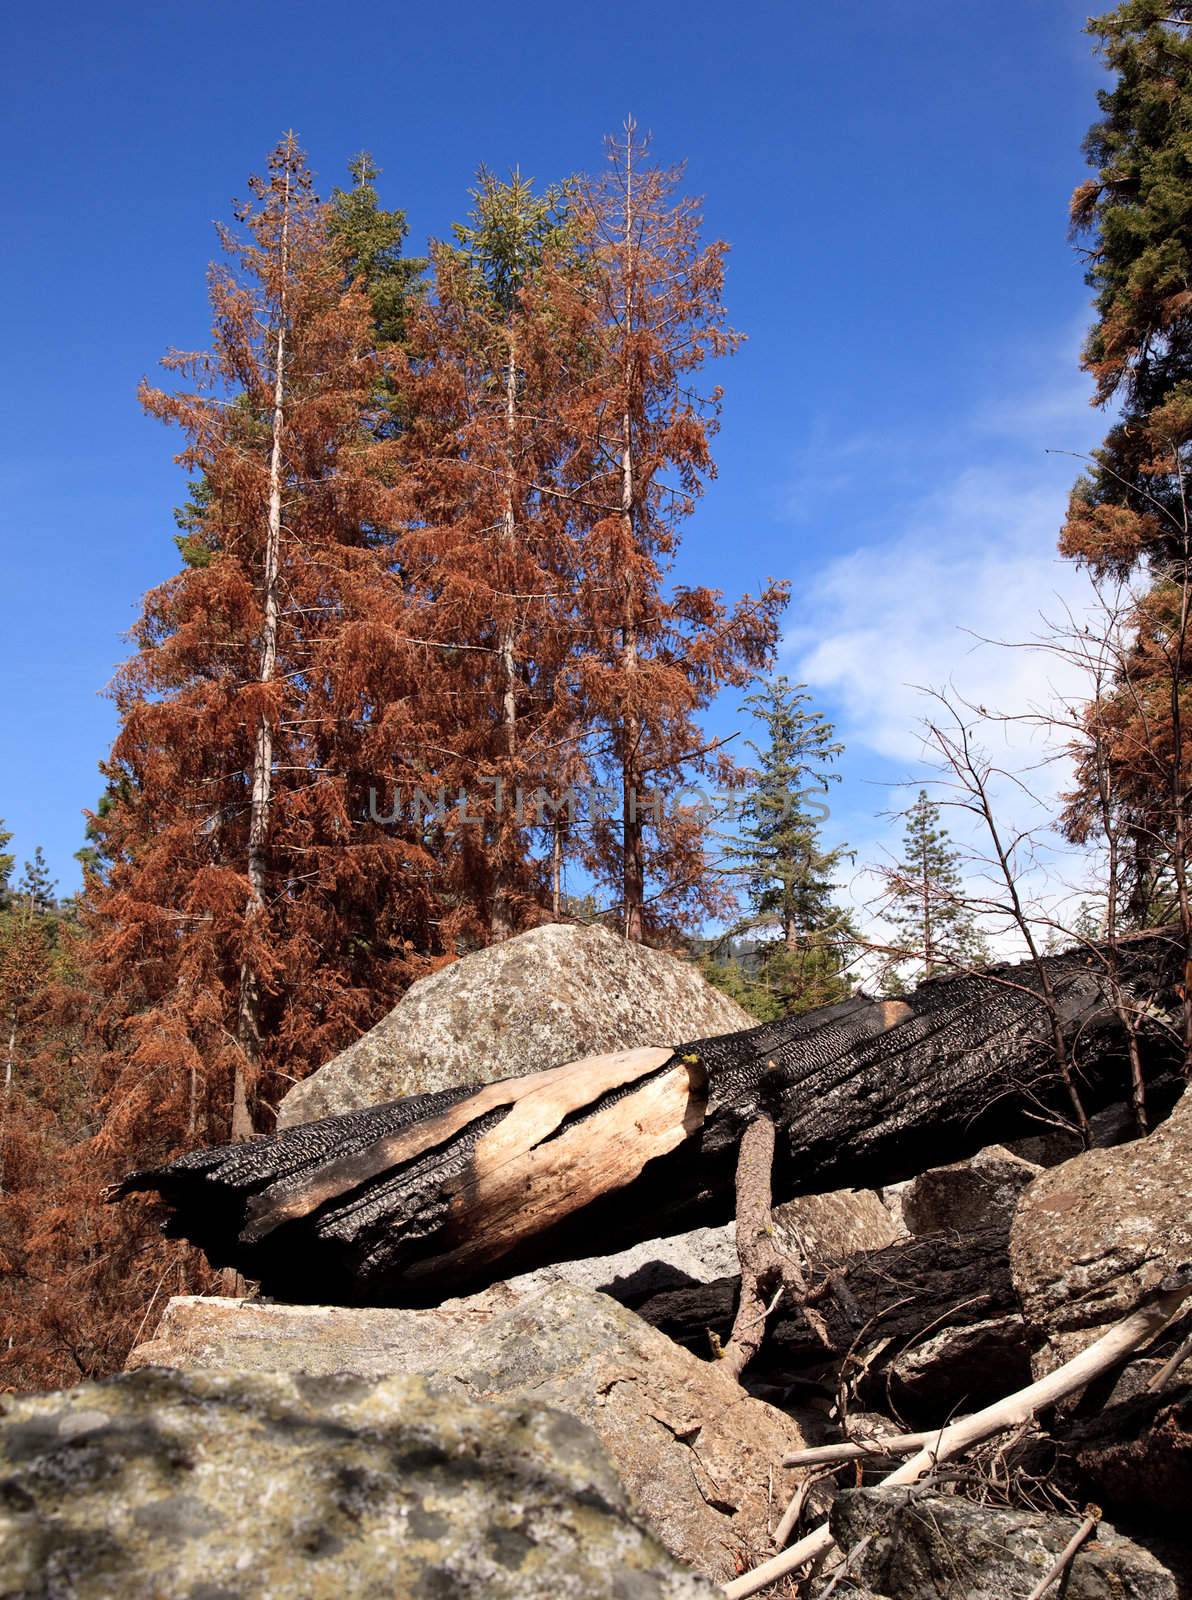 Blackened trunks show the signs of raging forest fire